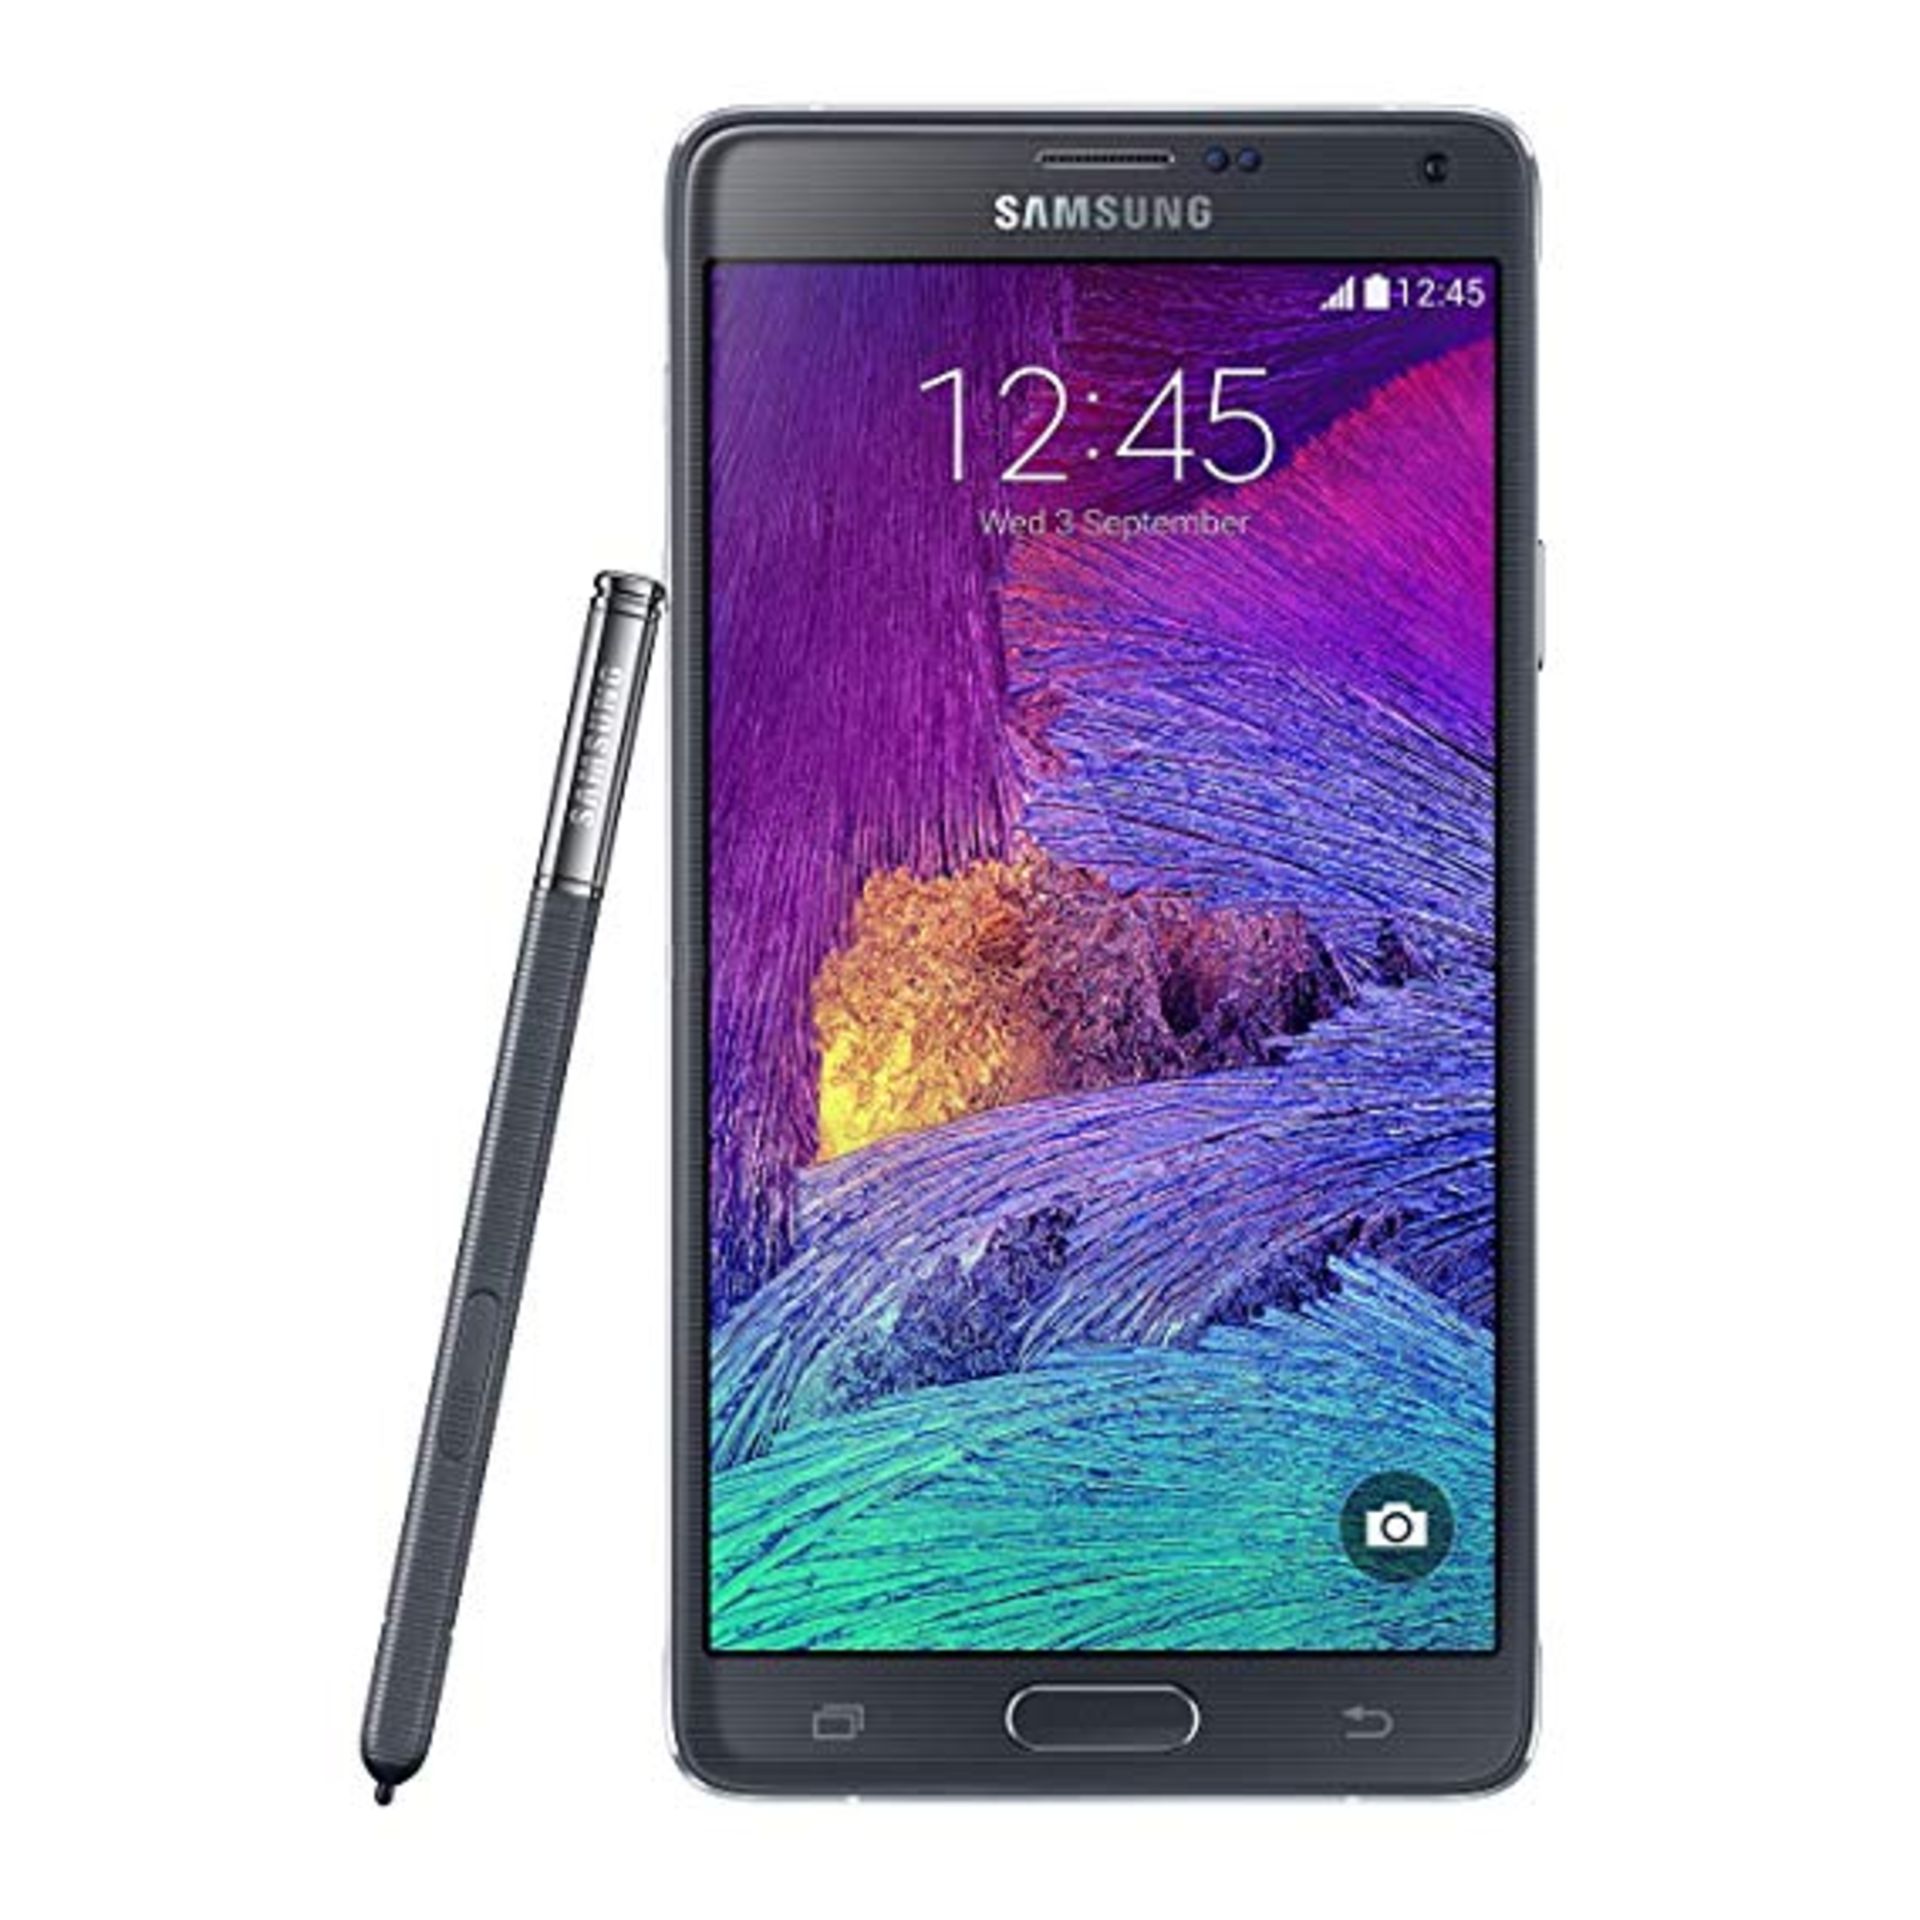 Grade A Samsung Note 4 ( N910A/T/V/P) Colours May Vary Item available from approx 27th February